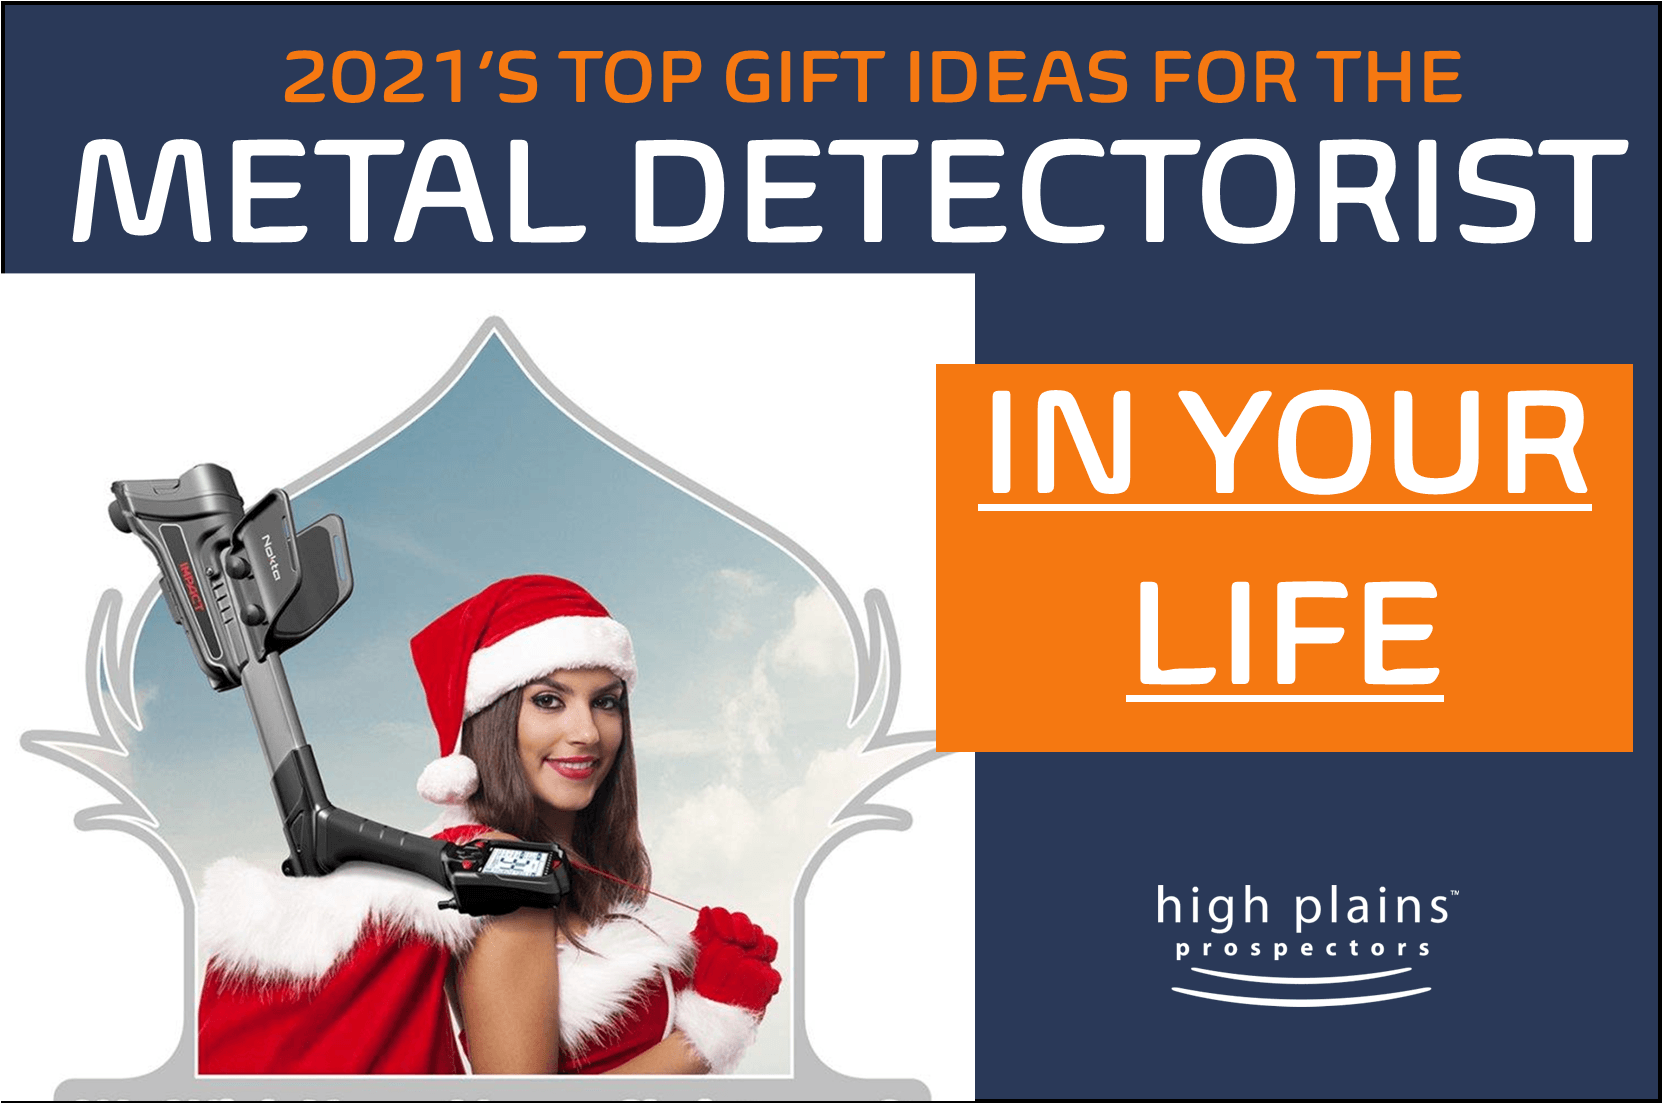 2021's Top Gift Ideas For The Metal Detectorist in Your Life